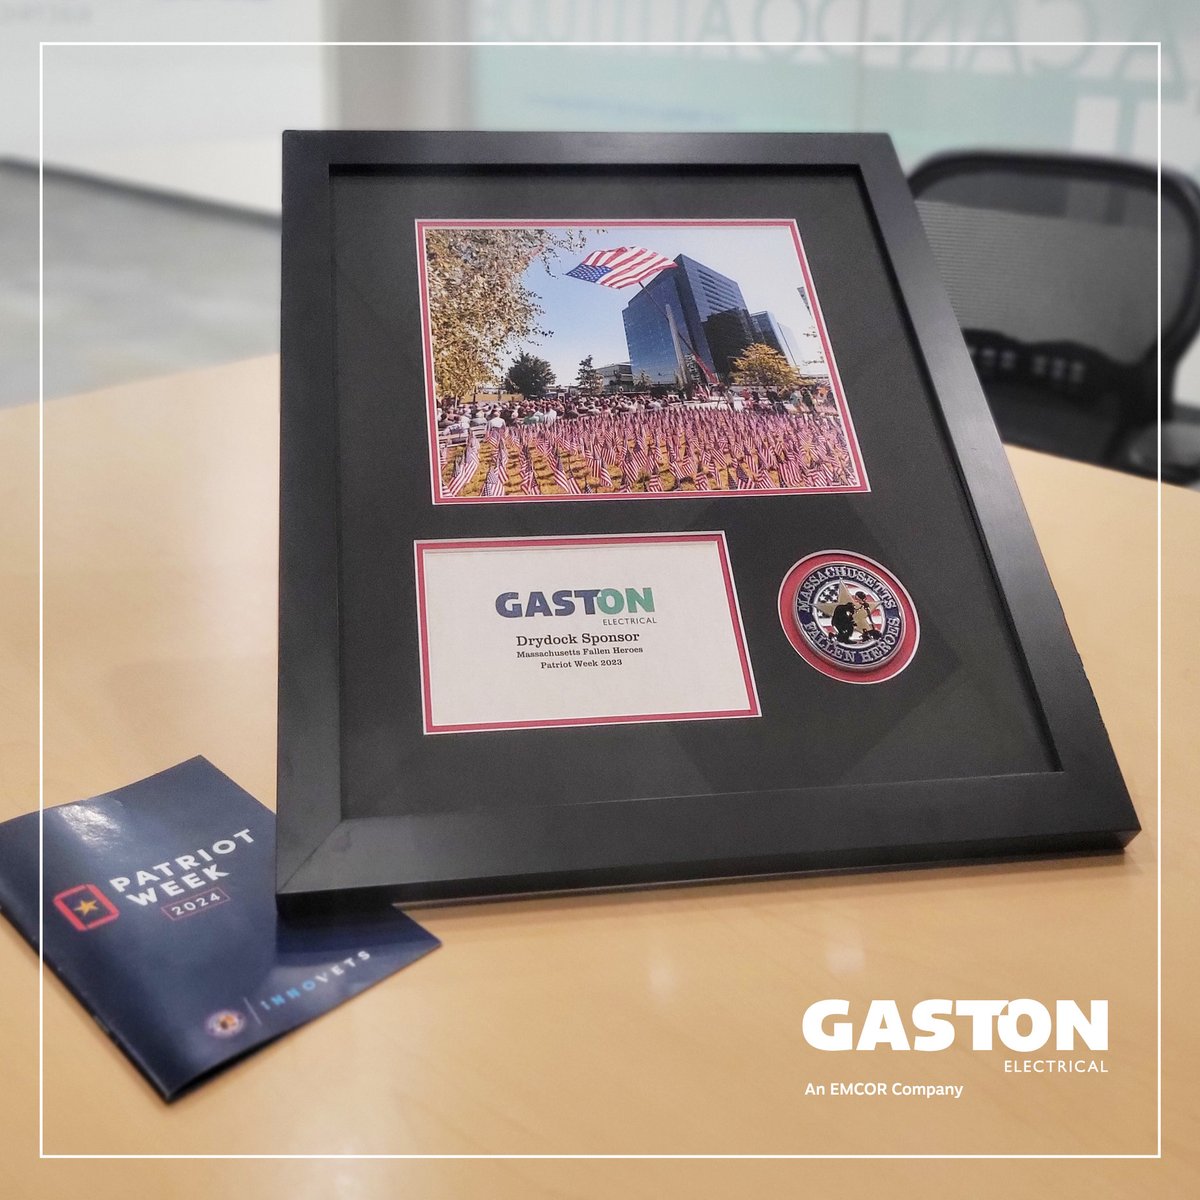 Just received this amazing, framed photo and challenge coin from our friends at @MAFallenHeroes. We're proud to continue our support of all Patriot Week events including the 9th Annual Rededication of the MFH Memorial in #Boston's Seaport. Honor, Support, Empower, Educate.